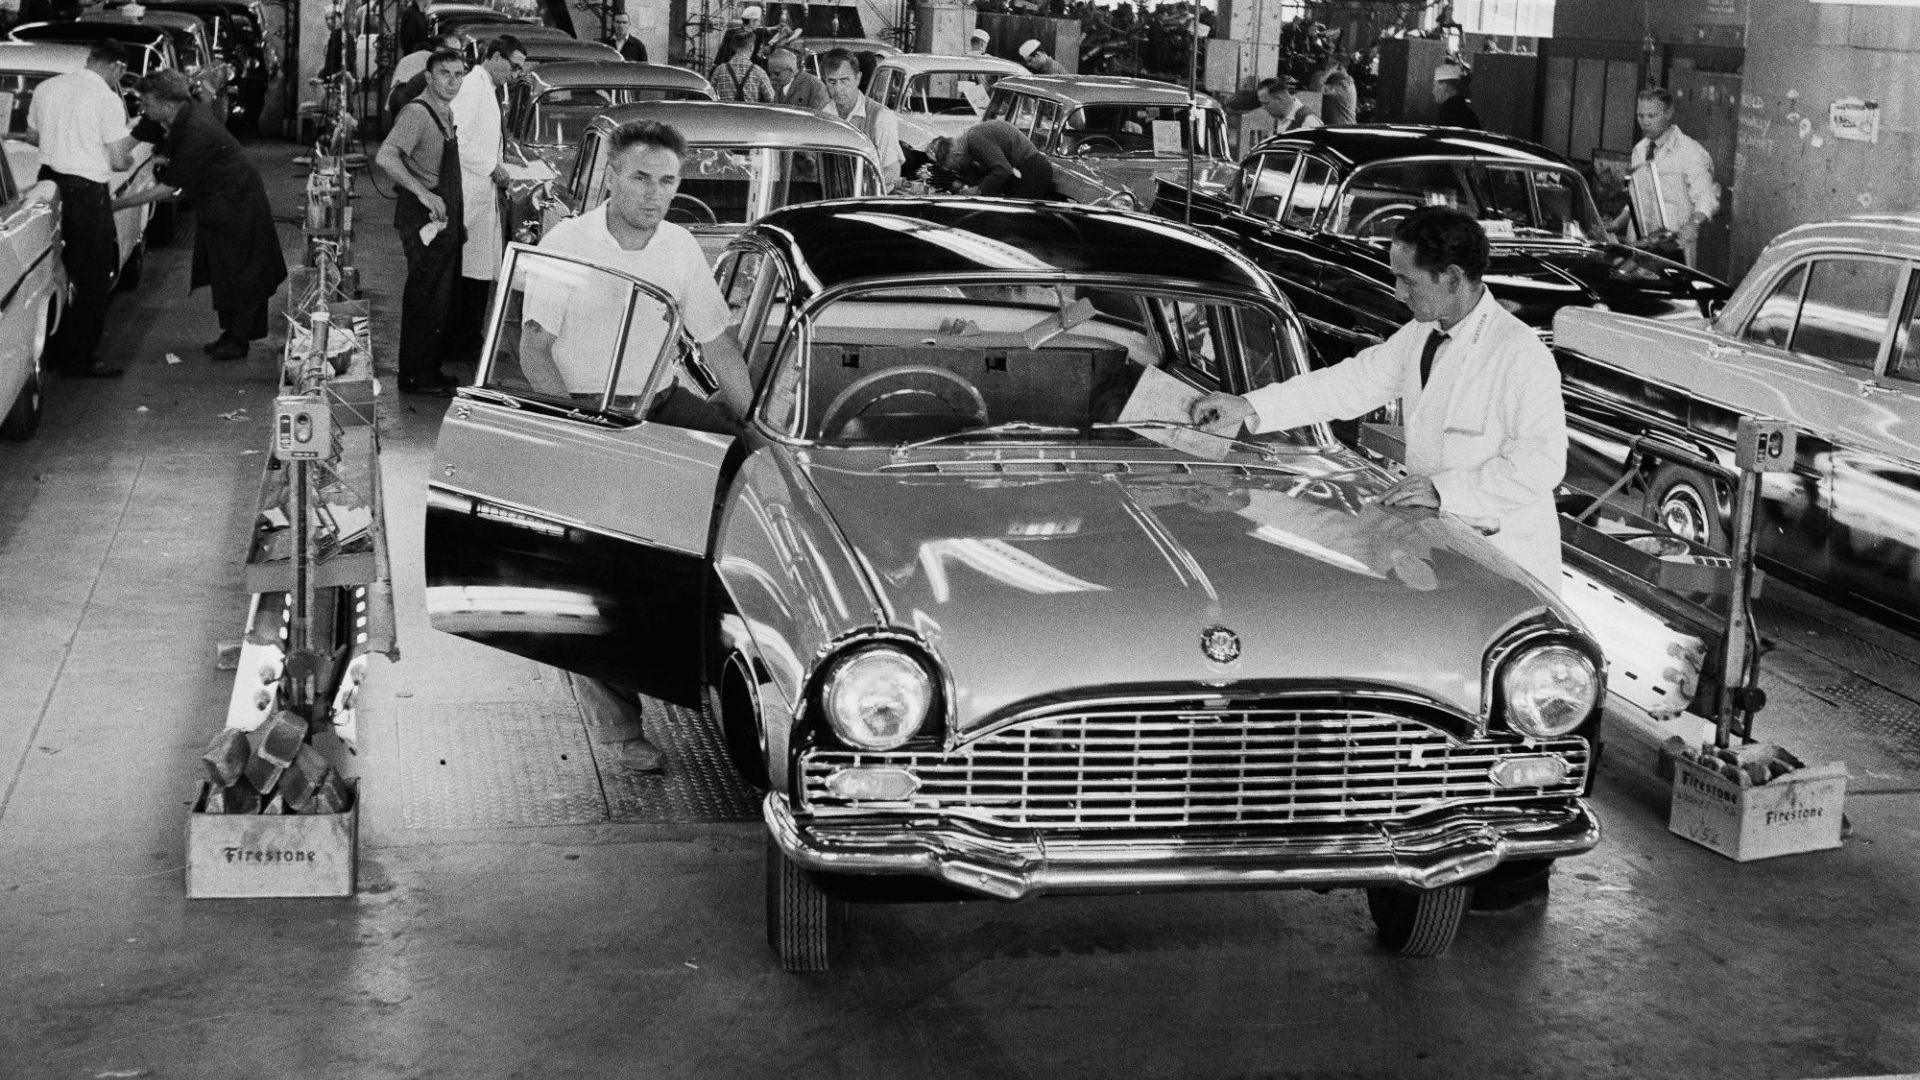 A Vauxhall assembly line in 1960, when the UK was still the third largest carmaker in the world. Photo: Hulton Archive/Getty